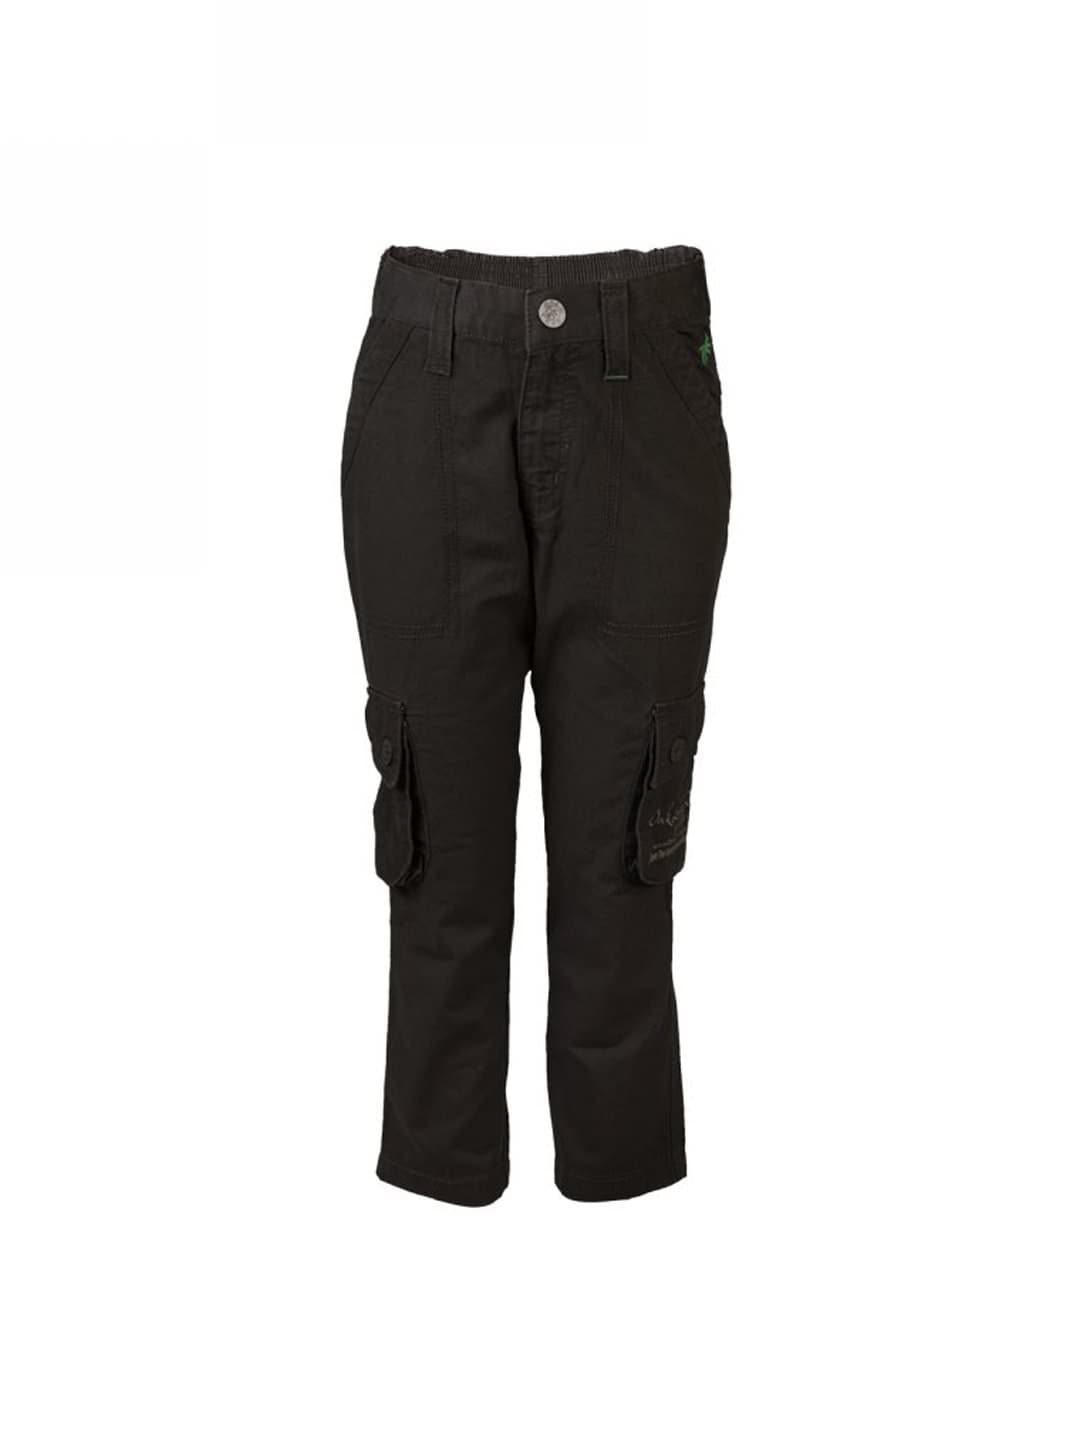 Palm Tree Kids Boy Solid Brown Trousers